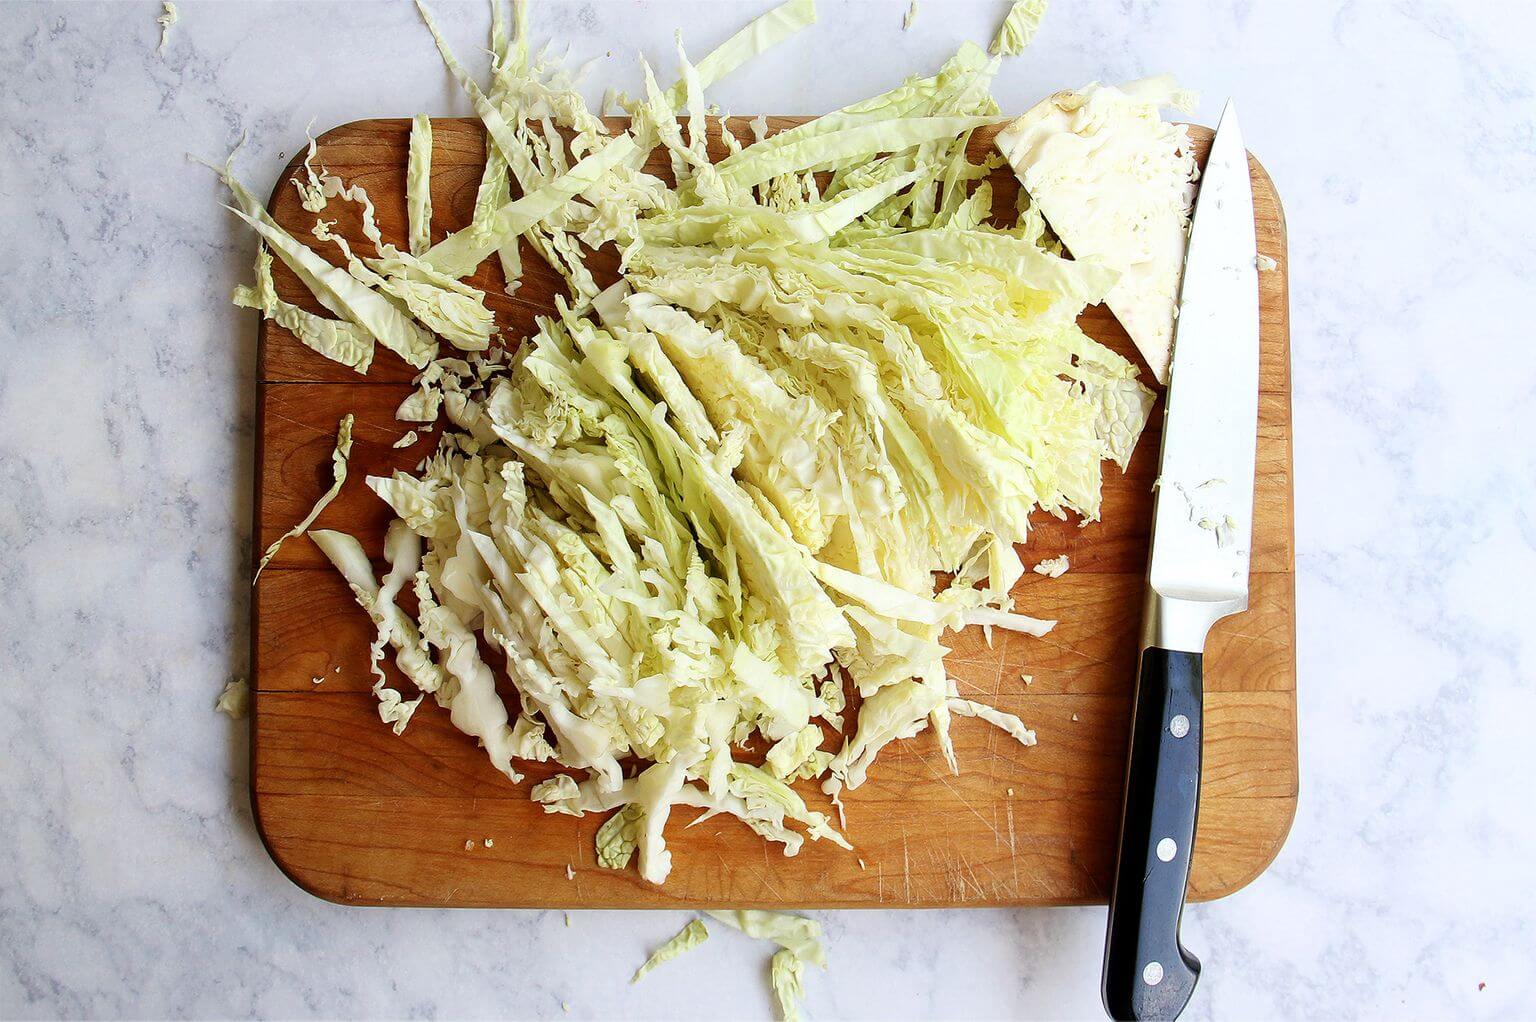 A board of shredded cabbage.